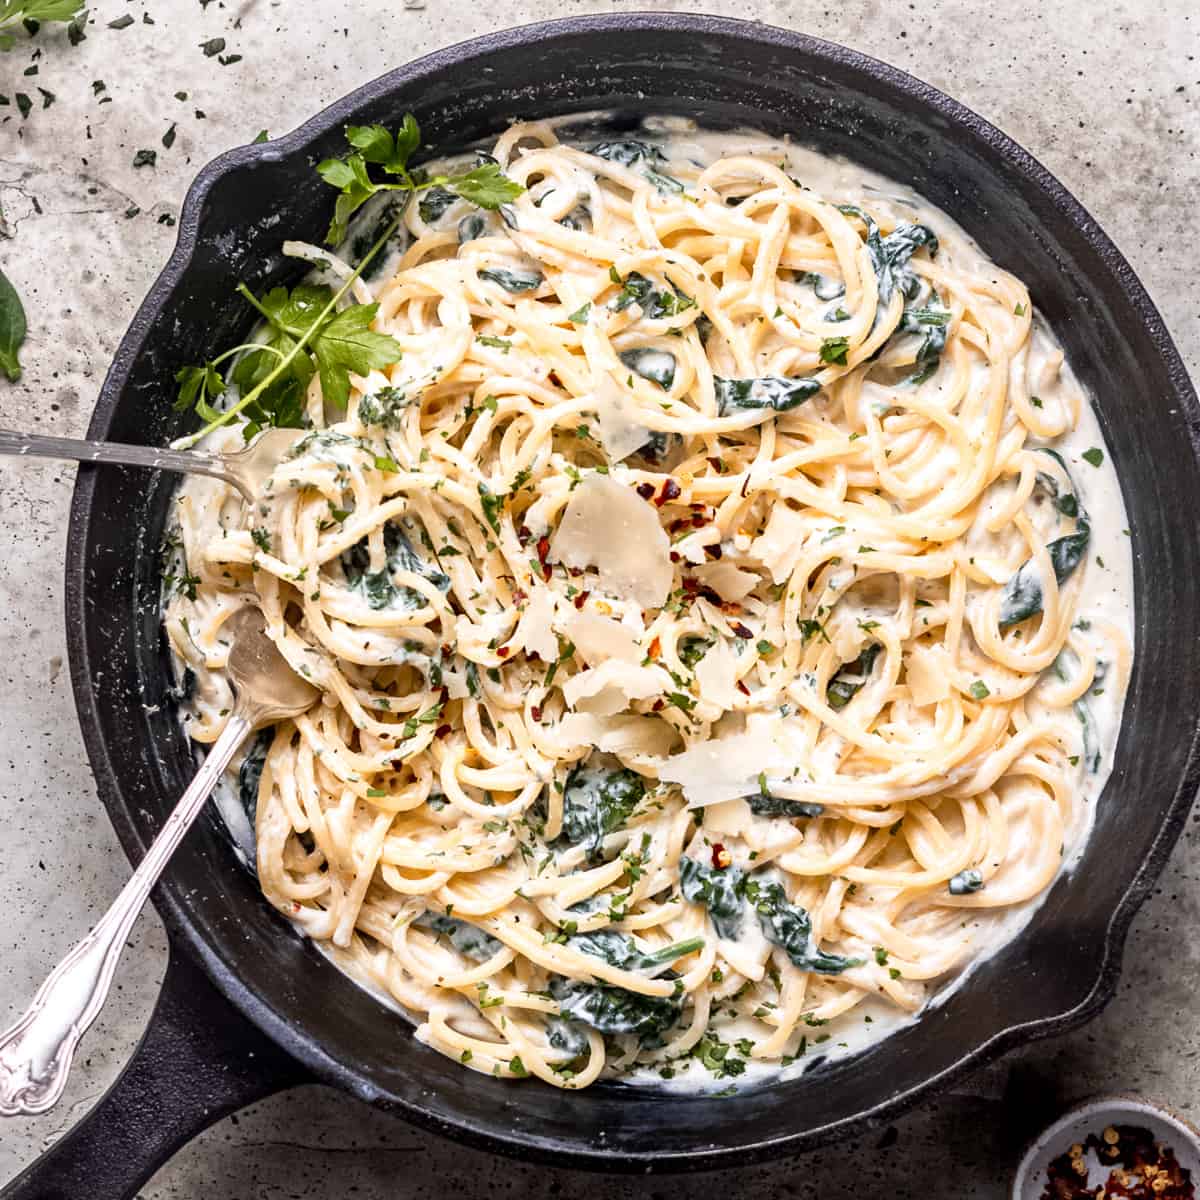 Ricotta and spinach pasta in a pan.